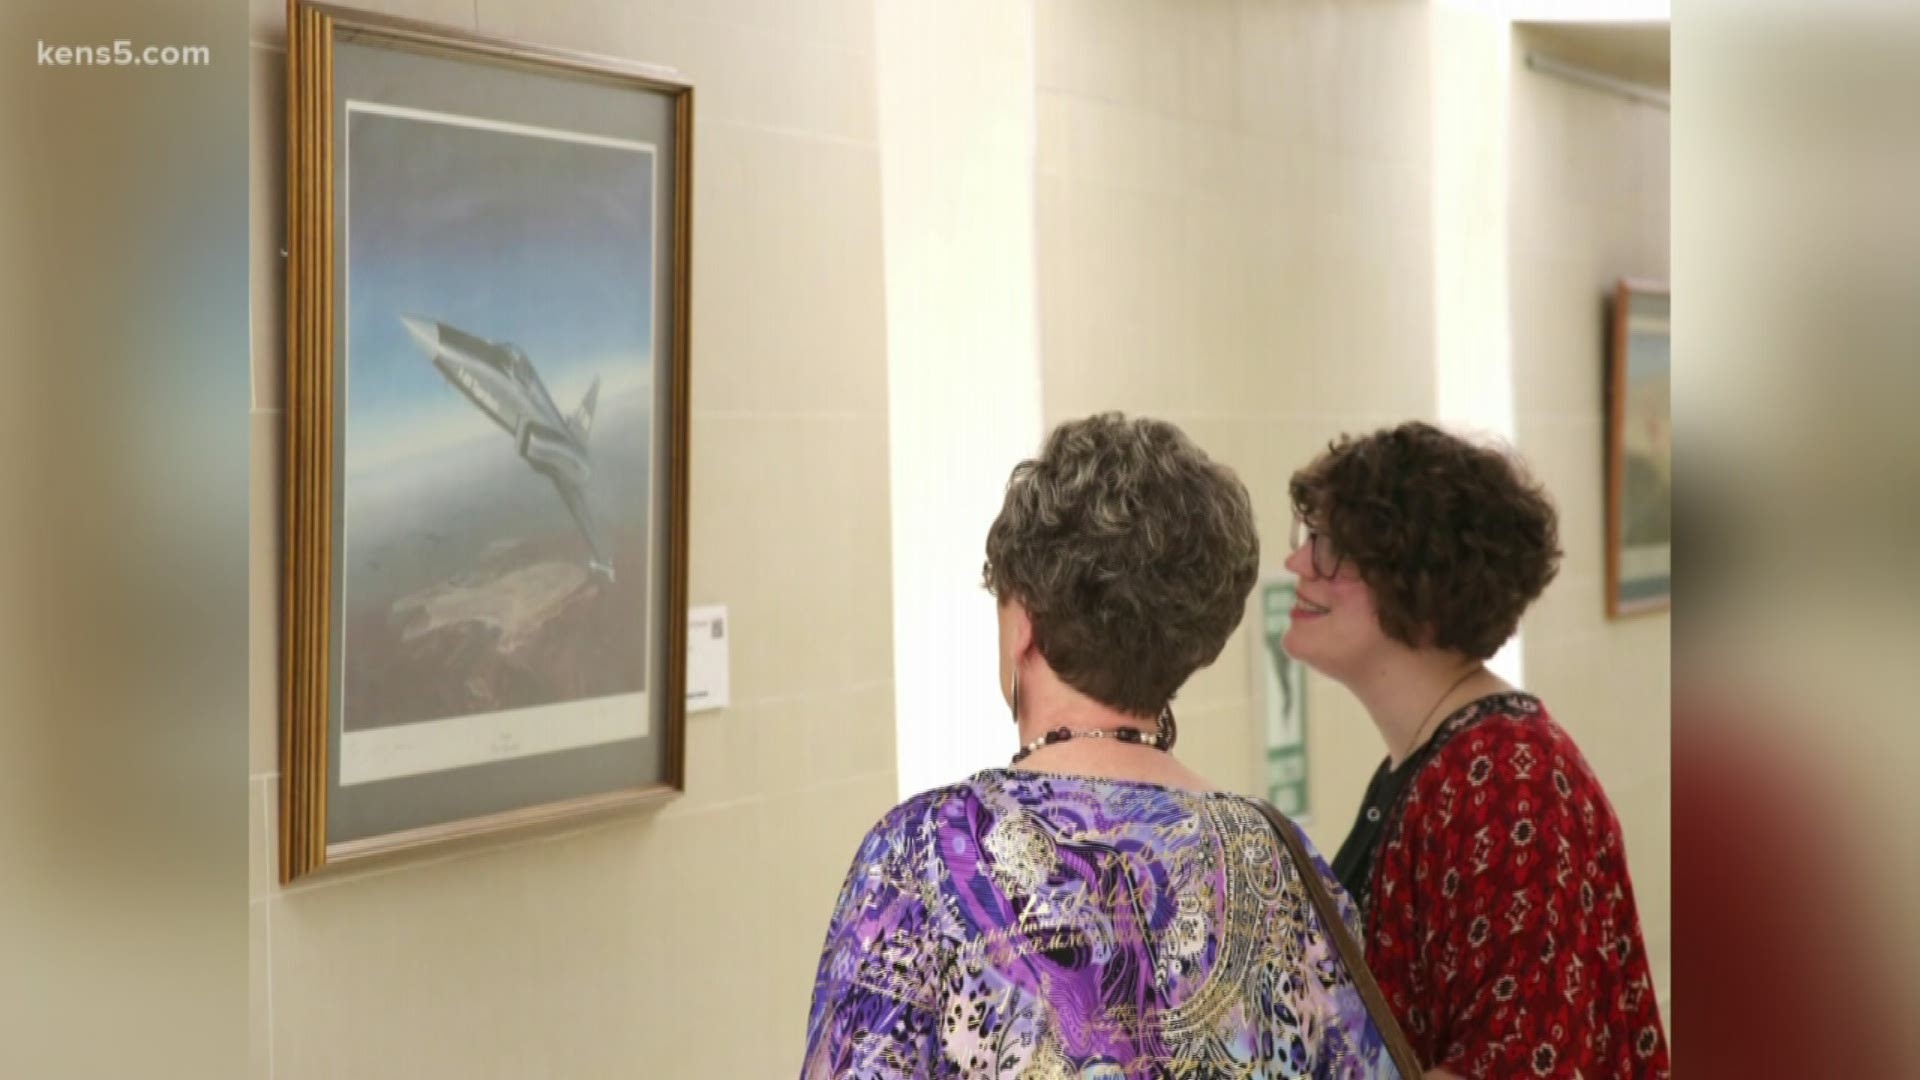 San Antonio's primary airport is looking more and more like an art gallery these days. Here's why.